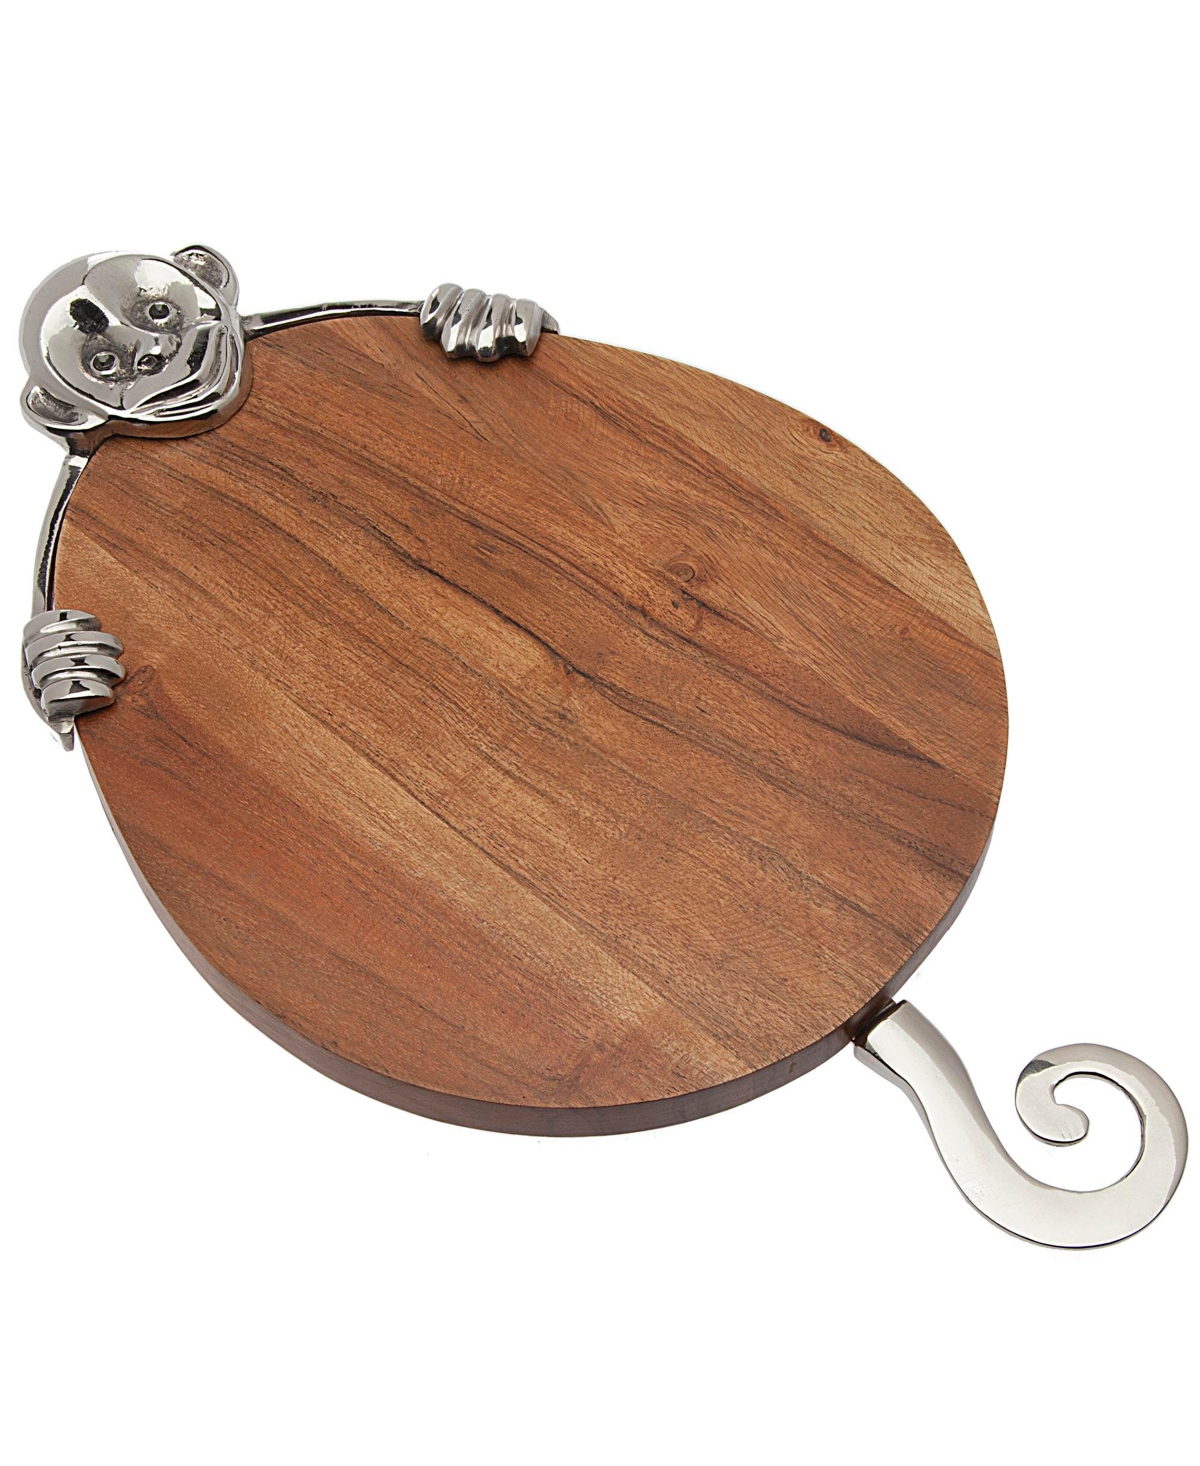 Godinger Monkey Design Acacia Wood Cheese Board With Cheese Server In Brown